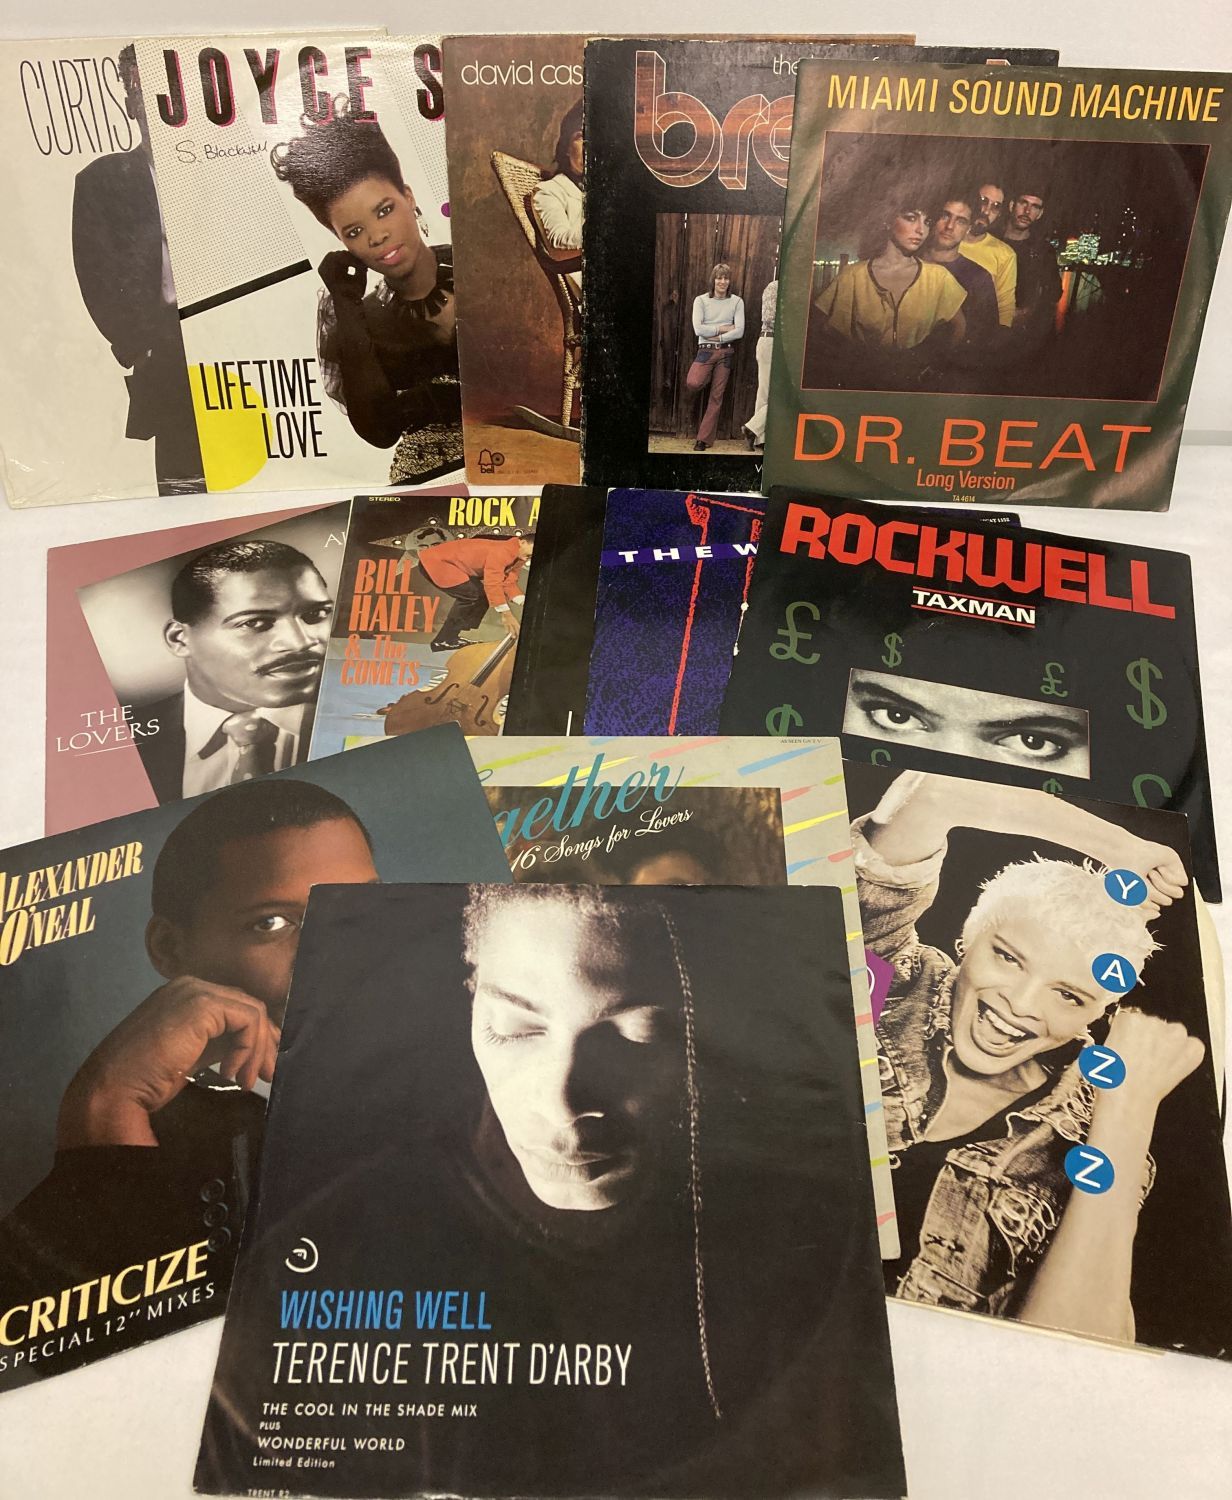 A small collection of vintage LP and 12 inch records.